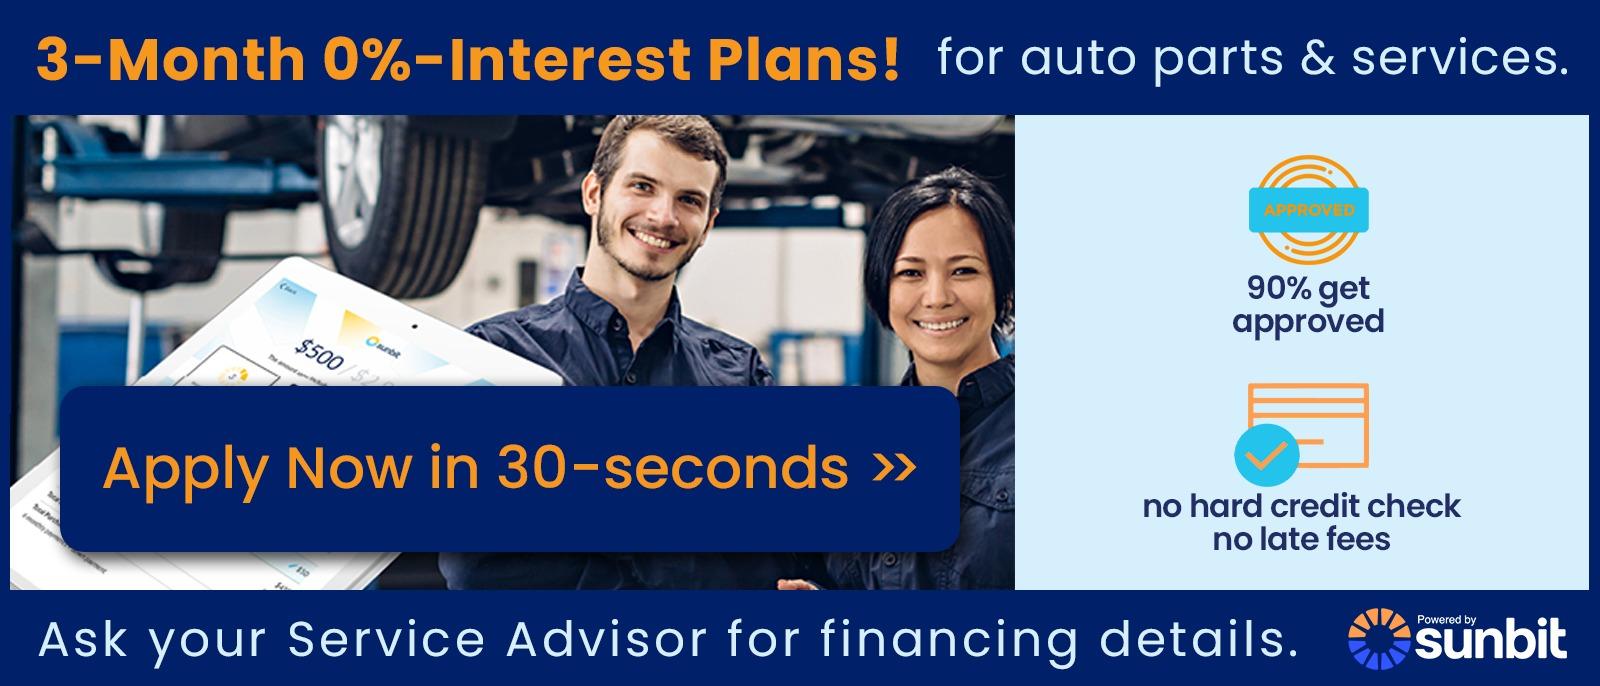 Sunbit Service & Parts financing banner - click to apply now in 30 seconds